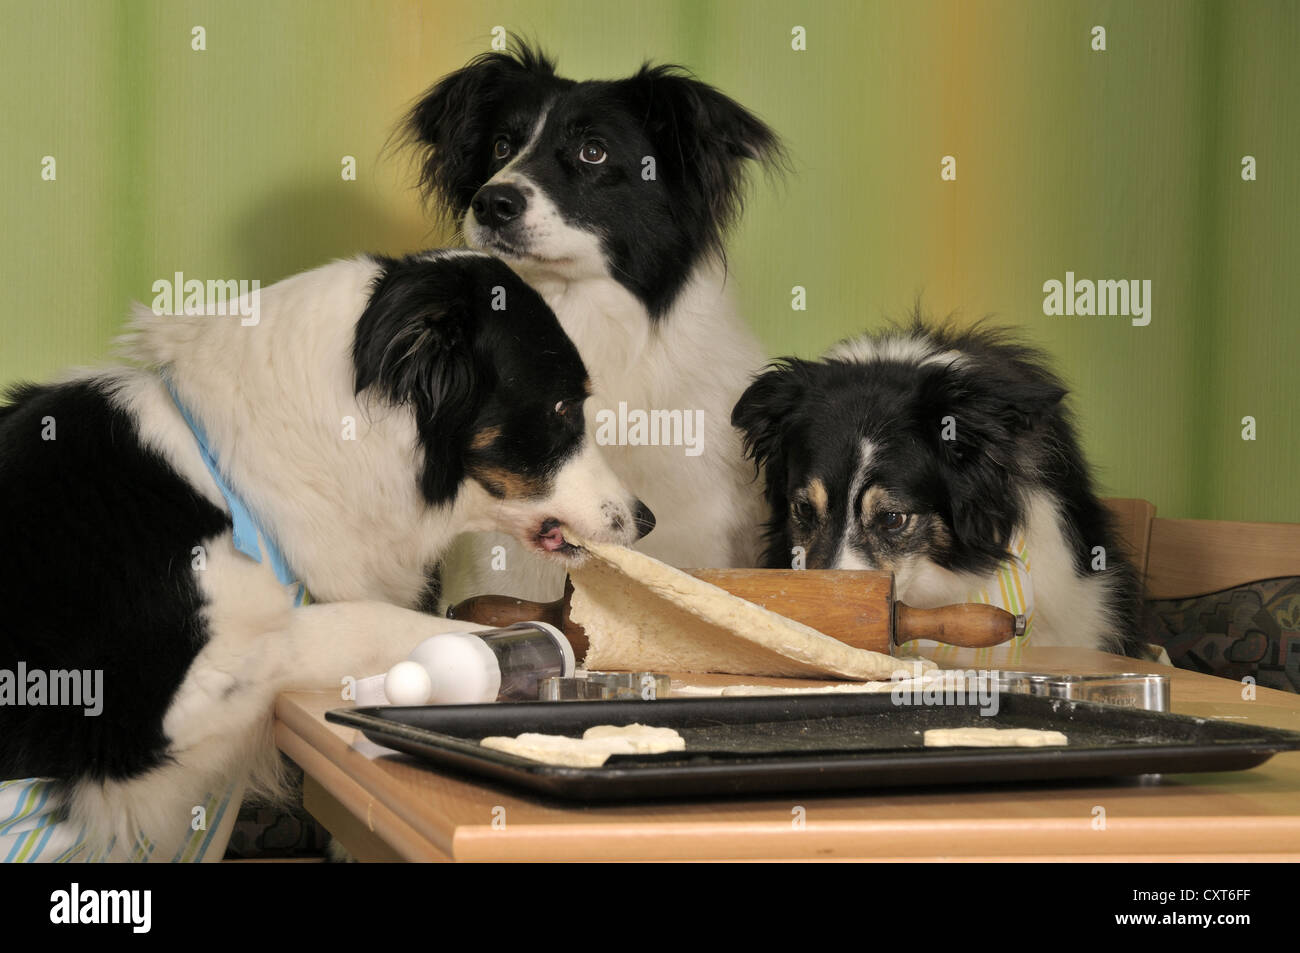 Three Border Collies making biscuits, one dog pulling the dough Stock Photo